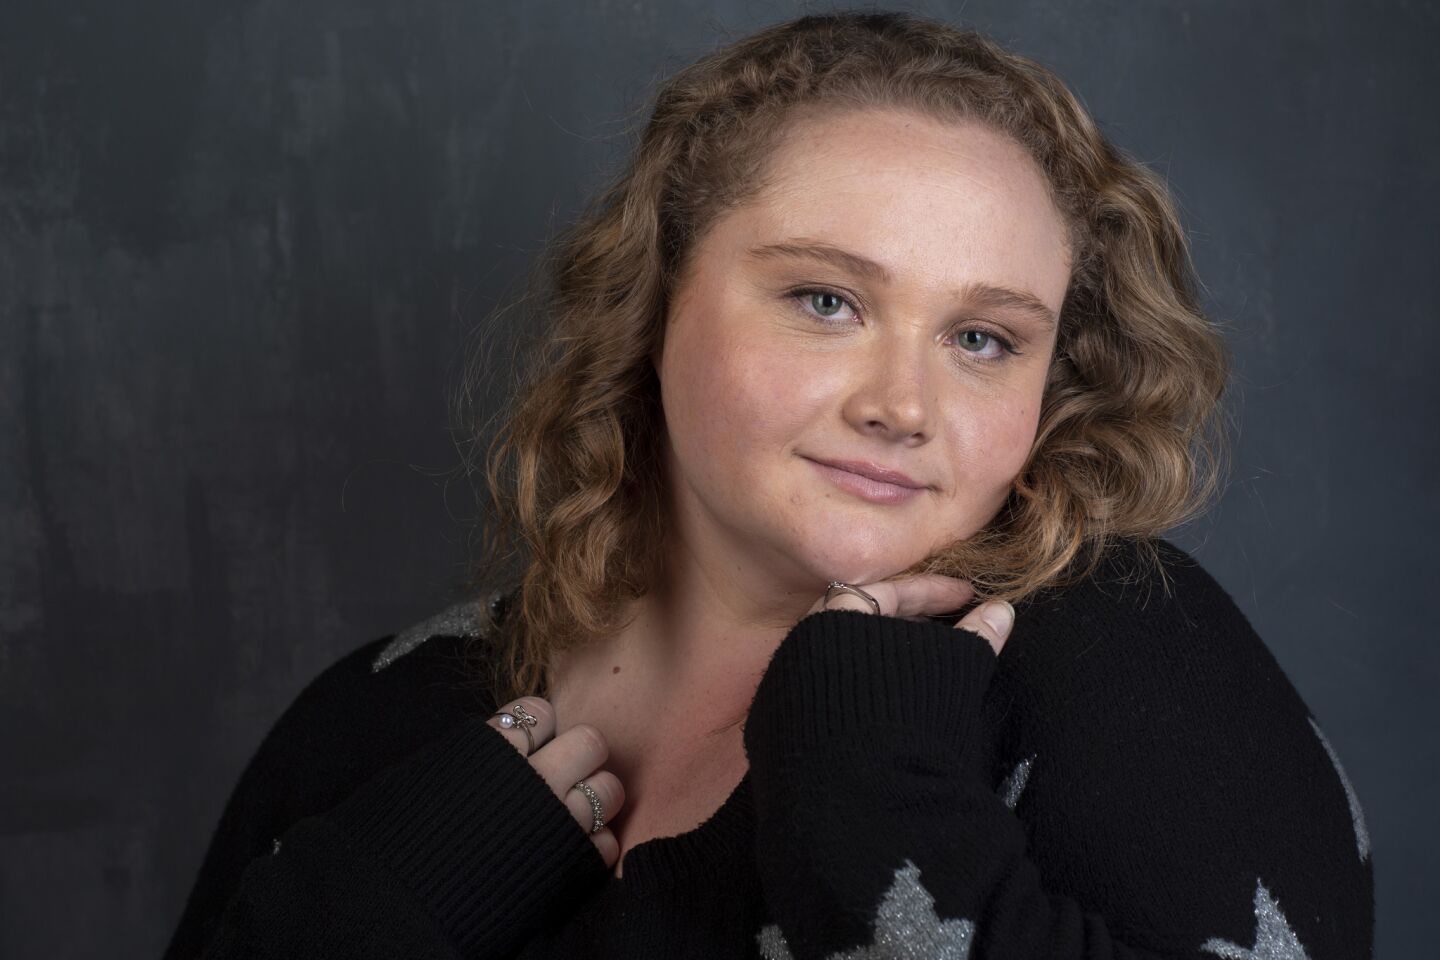 Actress Danielle MacDonald from the film "Paradise Hills."